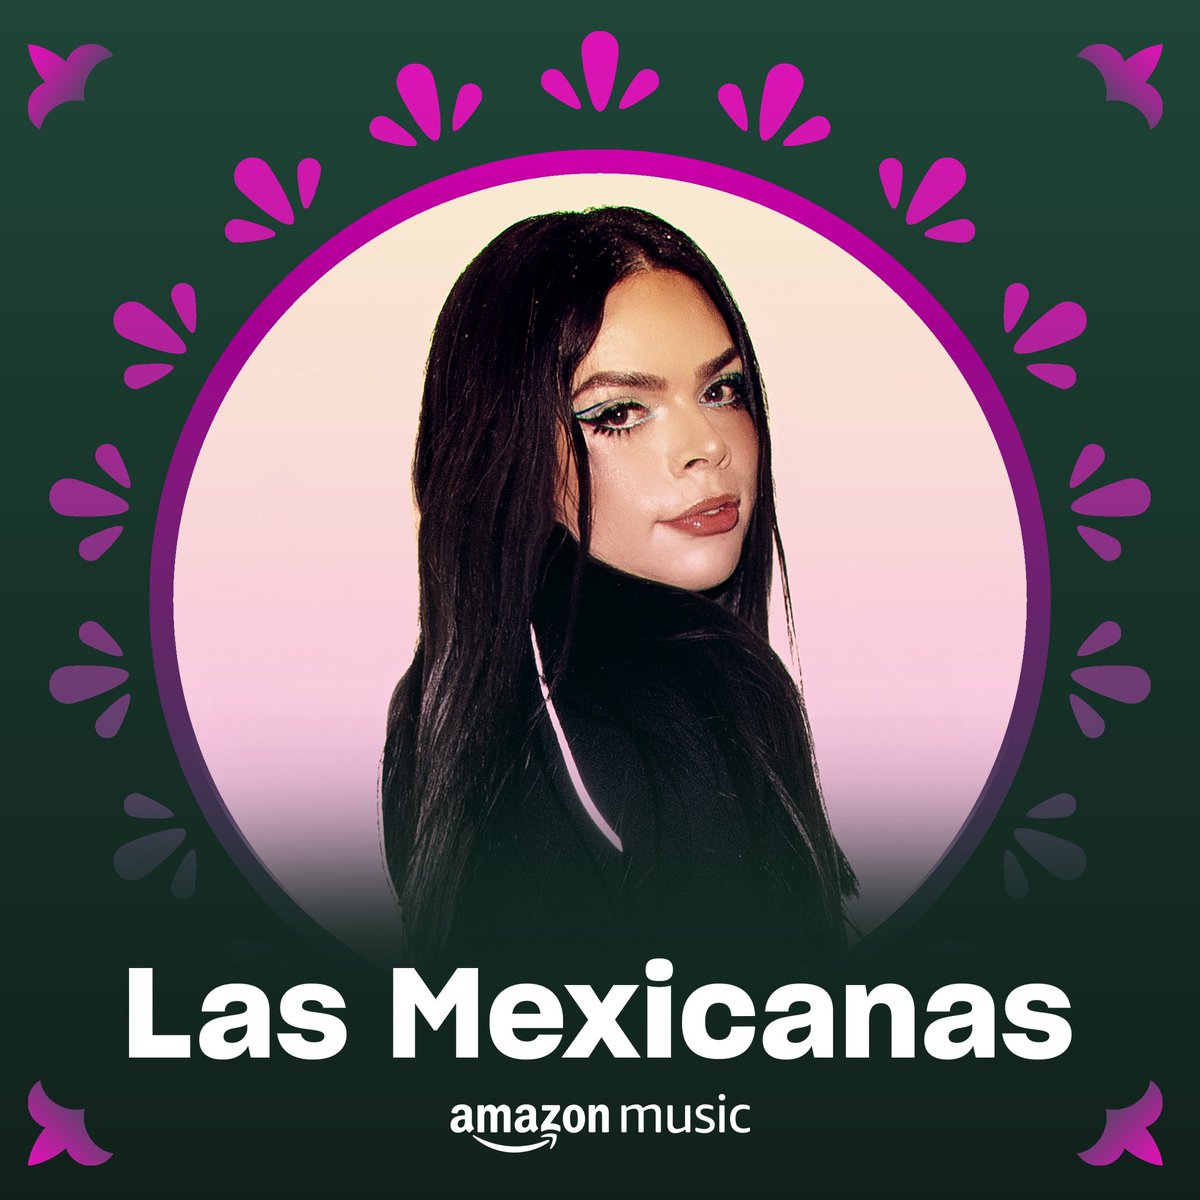 Thank you @AmazonMusicMX for making @vmorettii the cover of the playlist #LasMexicanas on #AmazonMusic with her new single “Por Ti” 🫶🏻😎💙 #synthpop #electropop #technopop #dreampop #hyperpop #indiepop #amazonmusicmx #valentinamoretti #rexrecords